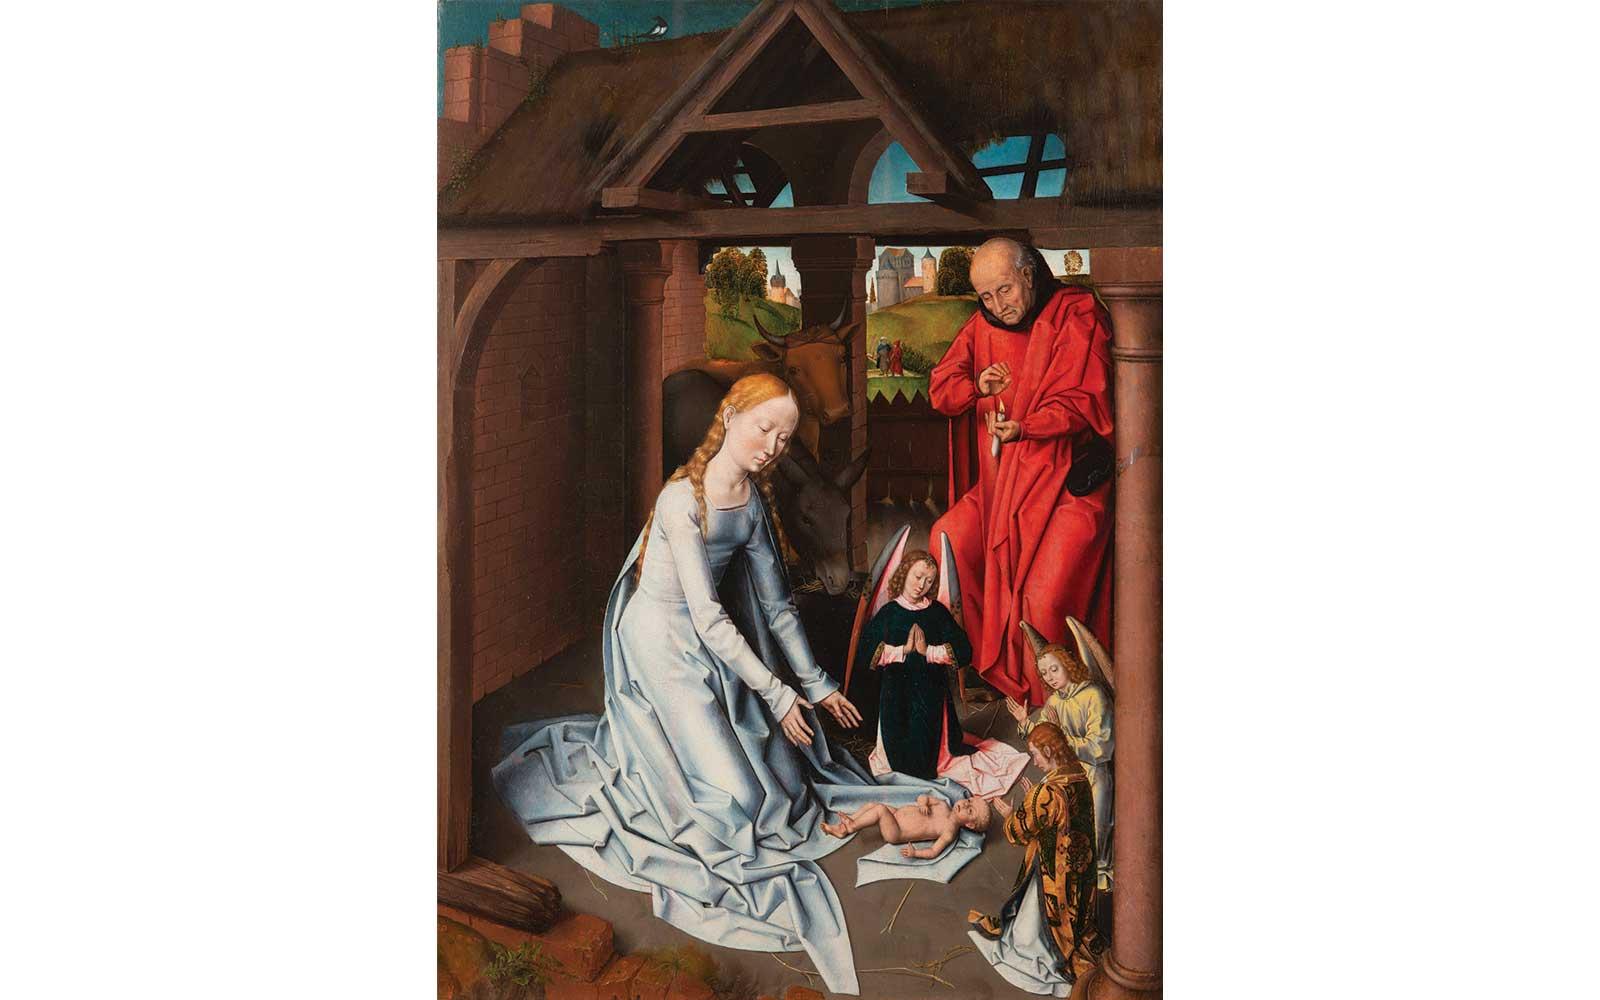 Hans Memling and Workshop, The Nativity, about 1480. 